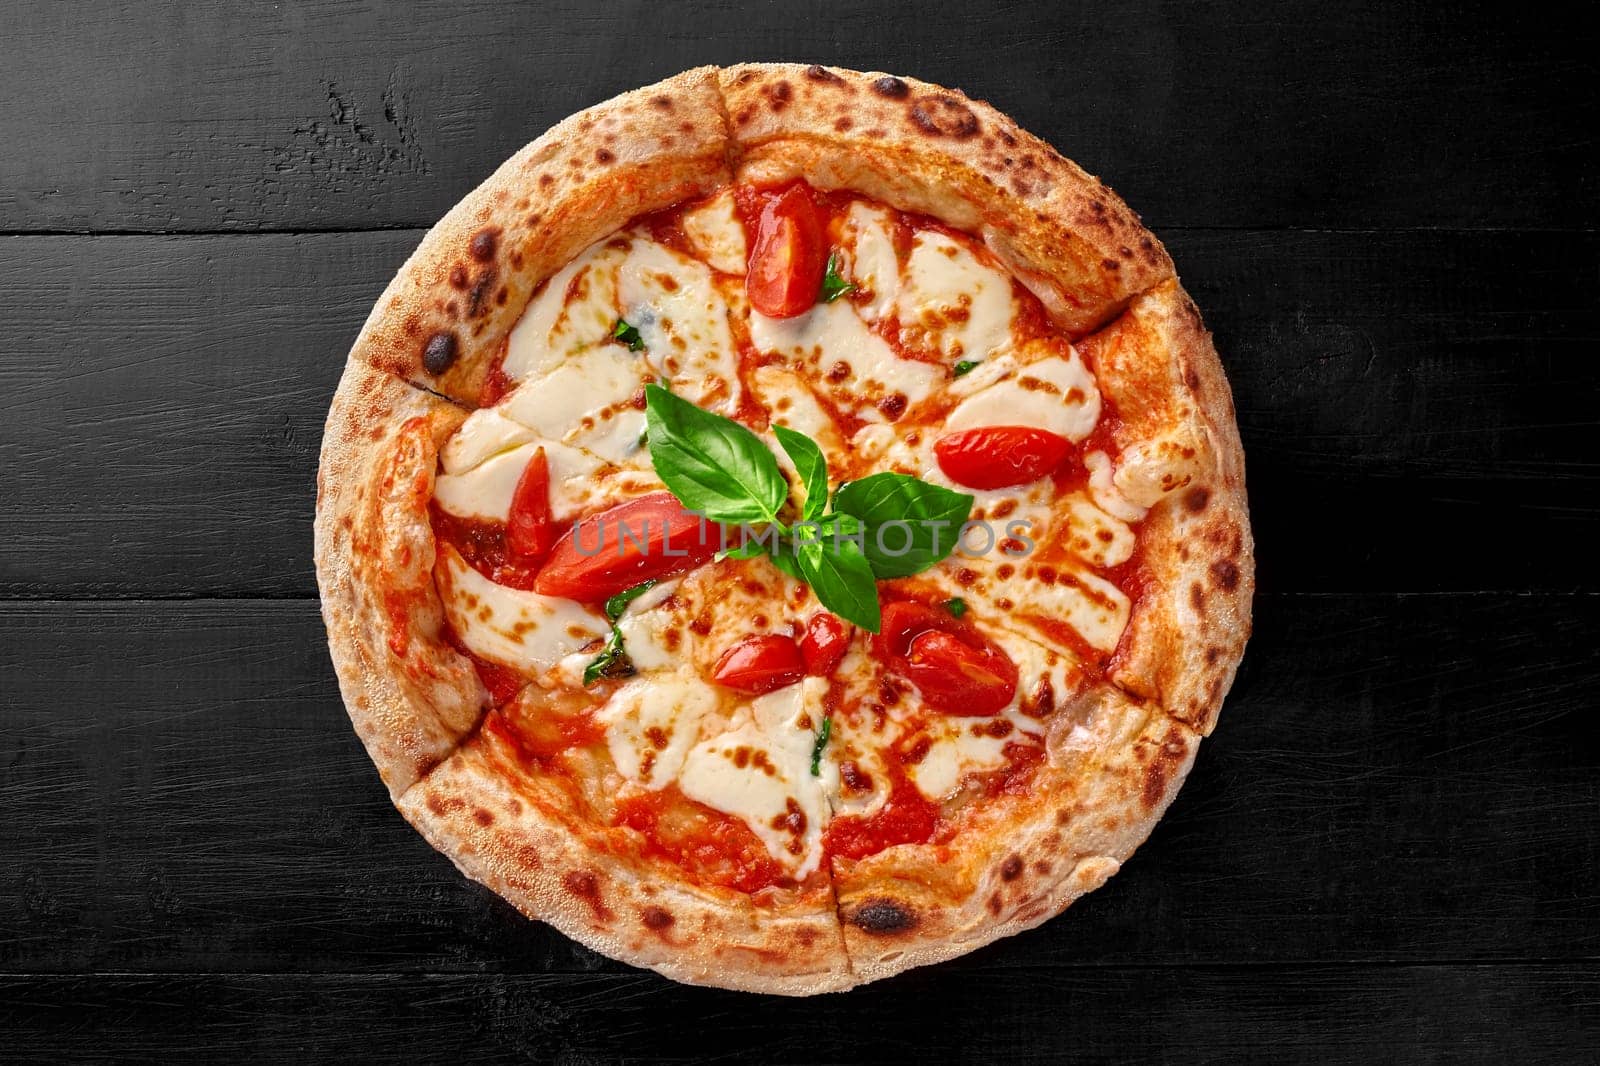 Appetizing traditional Italian pizza Margherita with tomatoes, mozzarella cheese and fresh fragrant green basil on black wooden background, top view. Authentic national cuisine